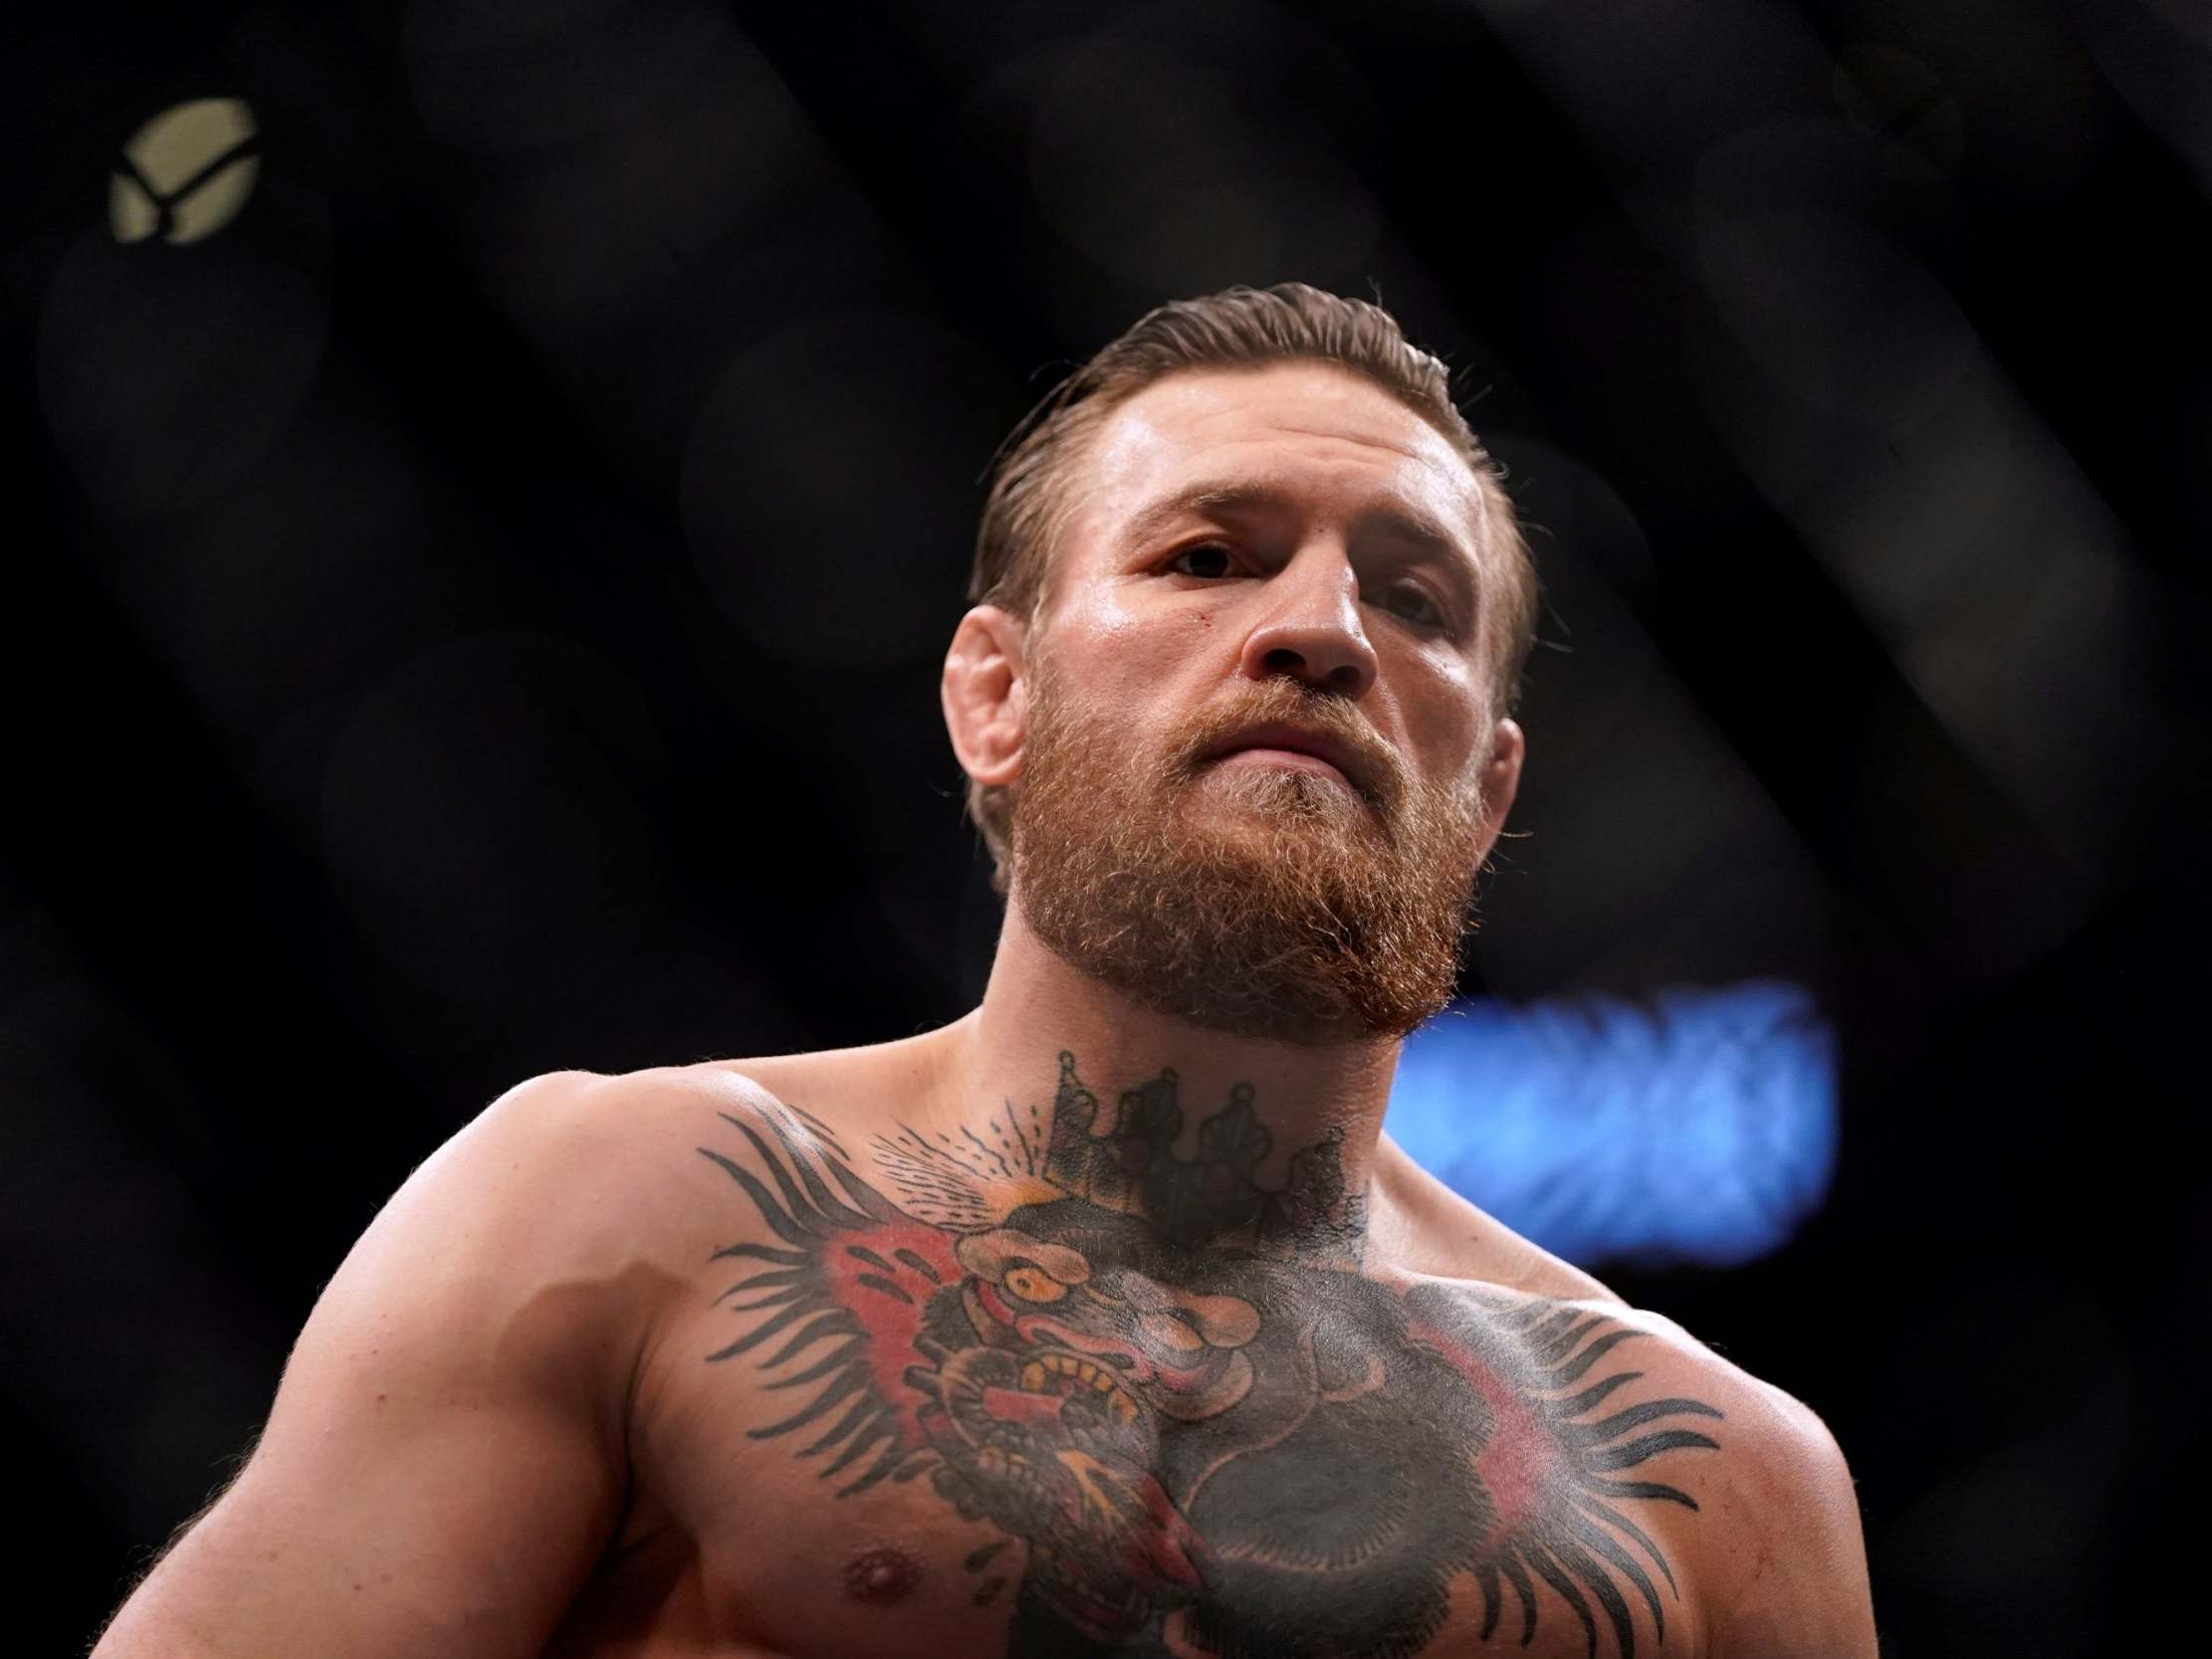 The returning Conor McGregor won his UFC bout against Donald Cerrone in under a minute at the weekend